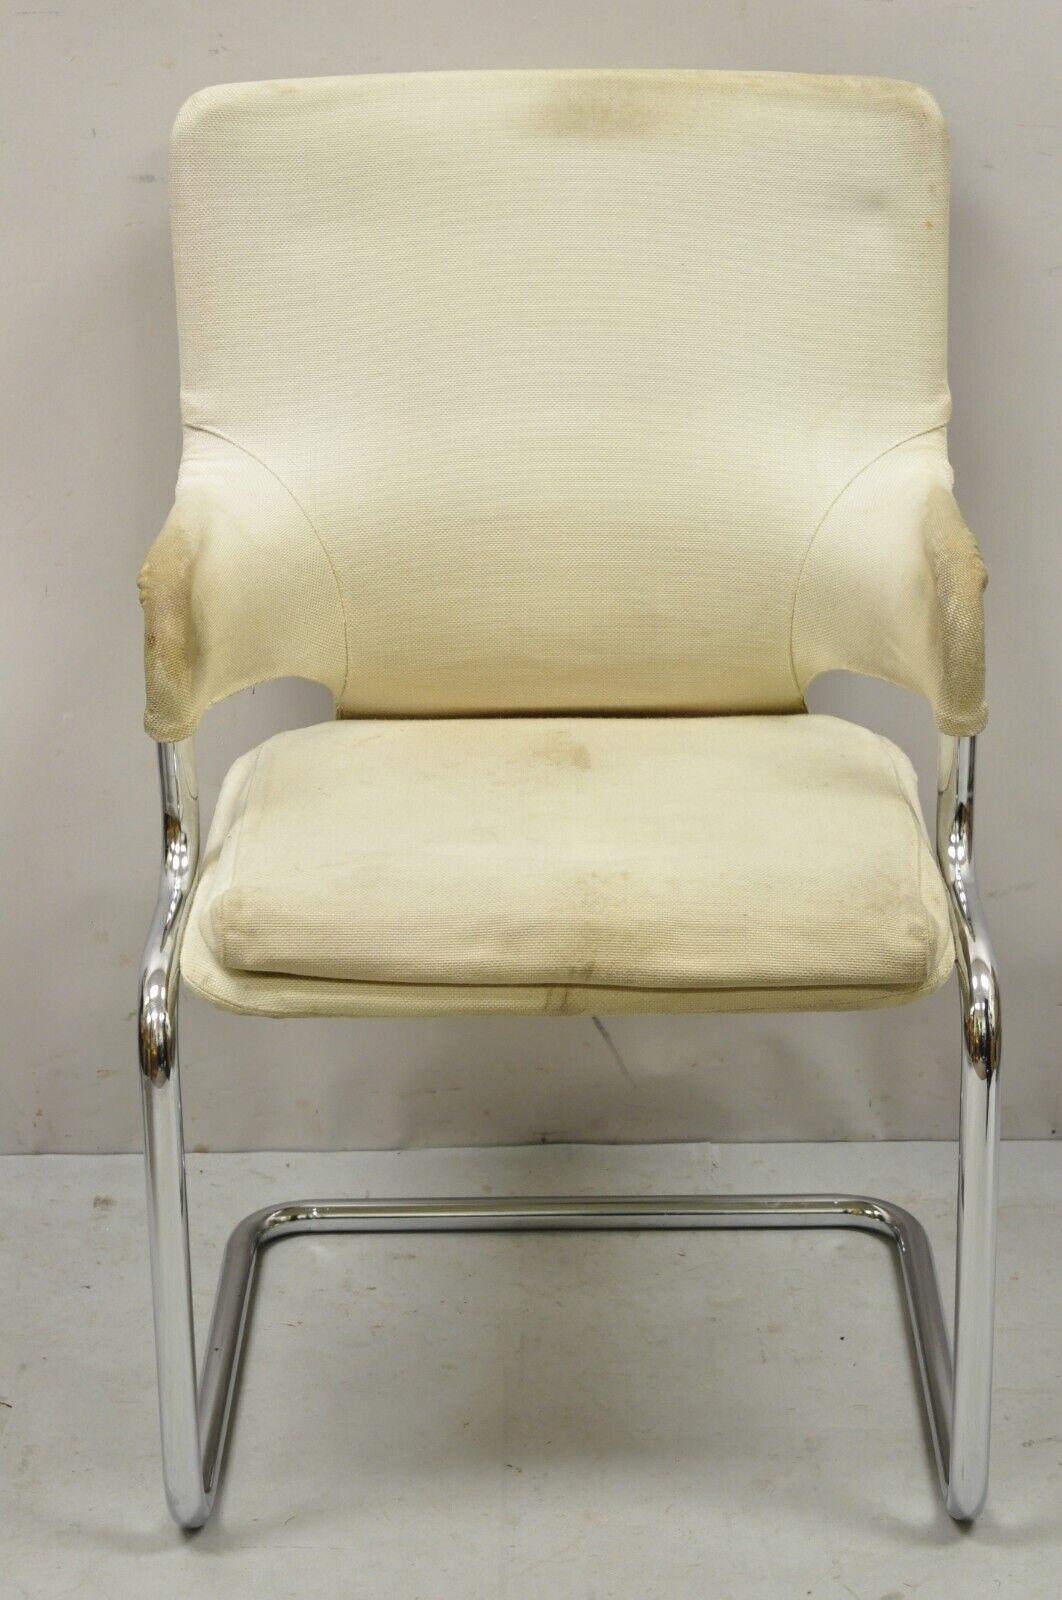 Mid-Century Modern tubular chrome arm chair with burlap seat. Item features tubular chrome frame, burlap seat, very nice vintage item, great style and form. Circa 1970. Measurements: 34.5